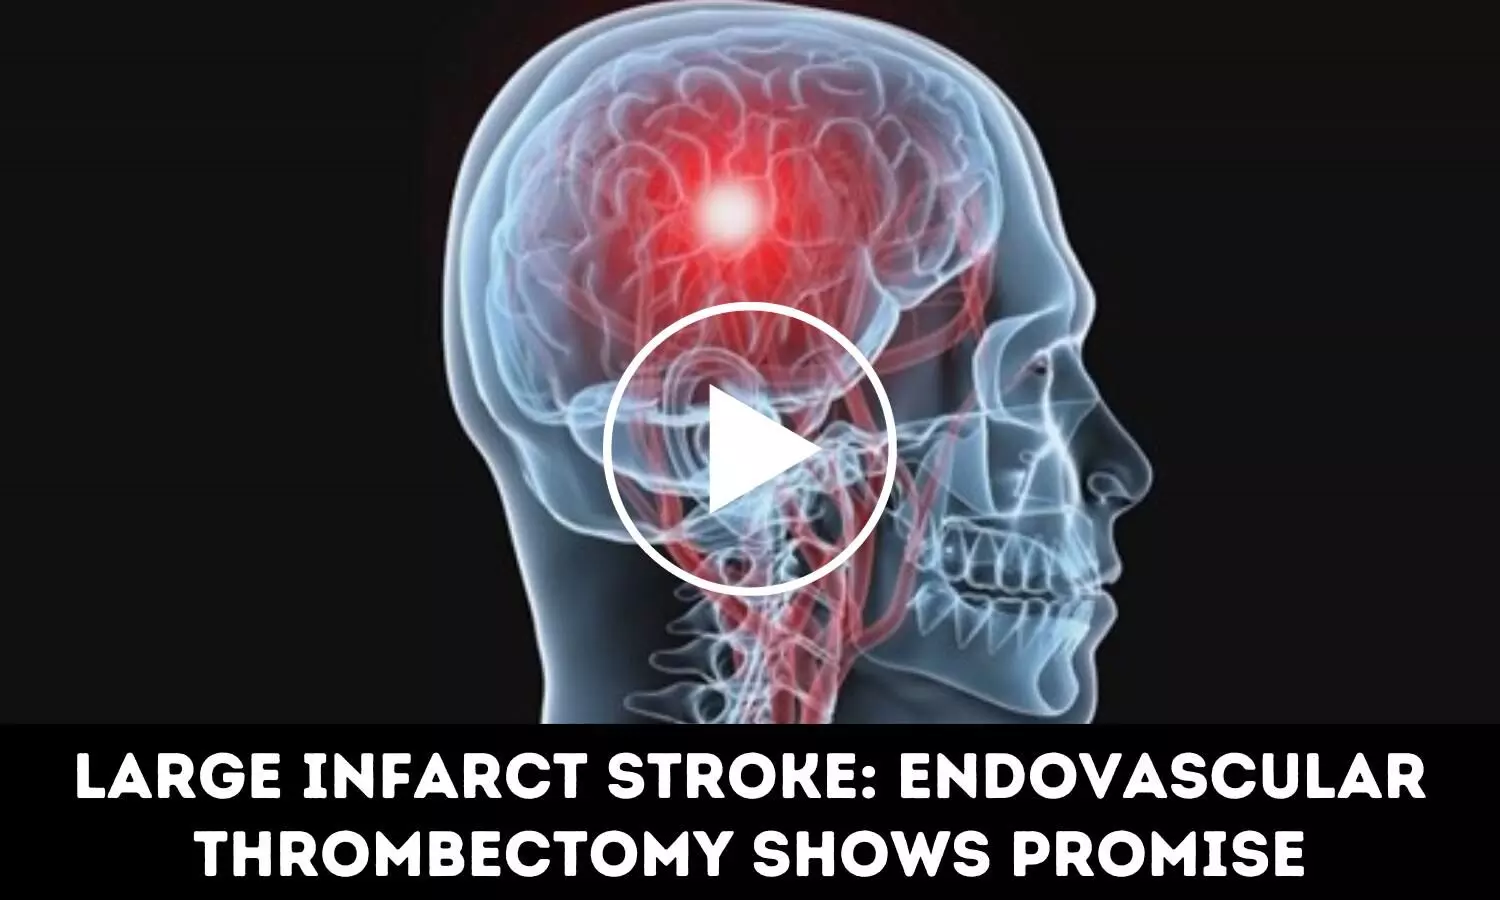 Large Infarct Stroke: Endovascular Thrombectomy Shows Promise